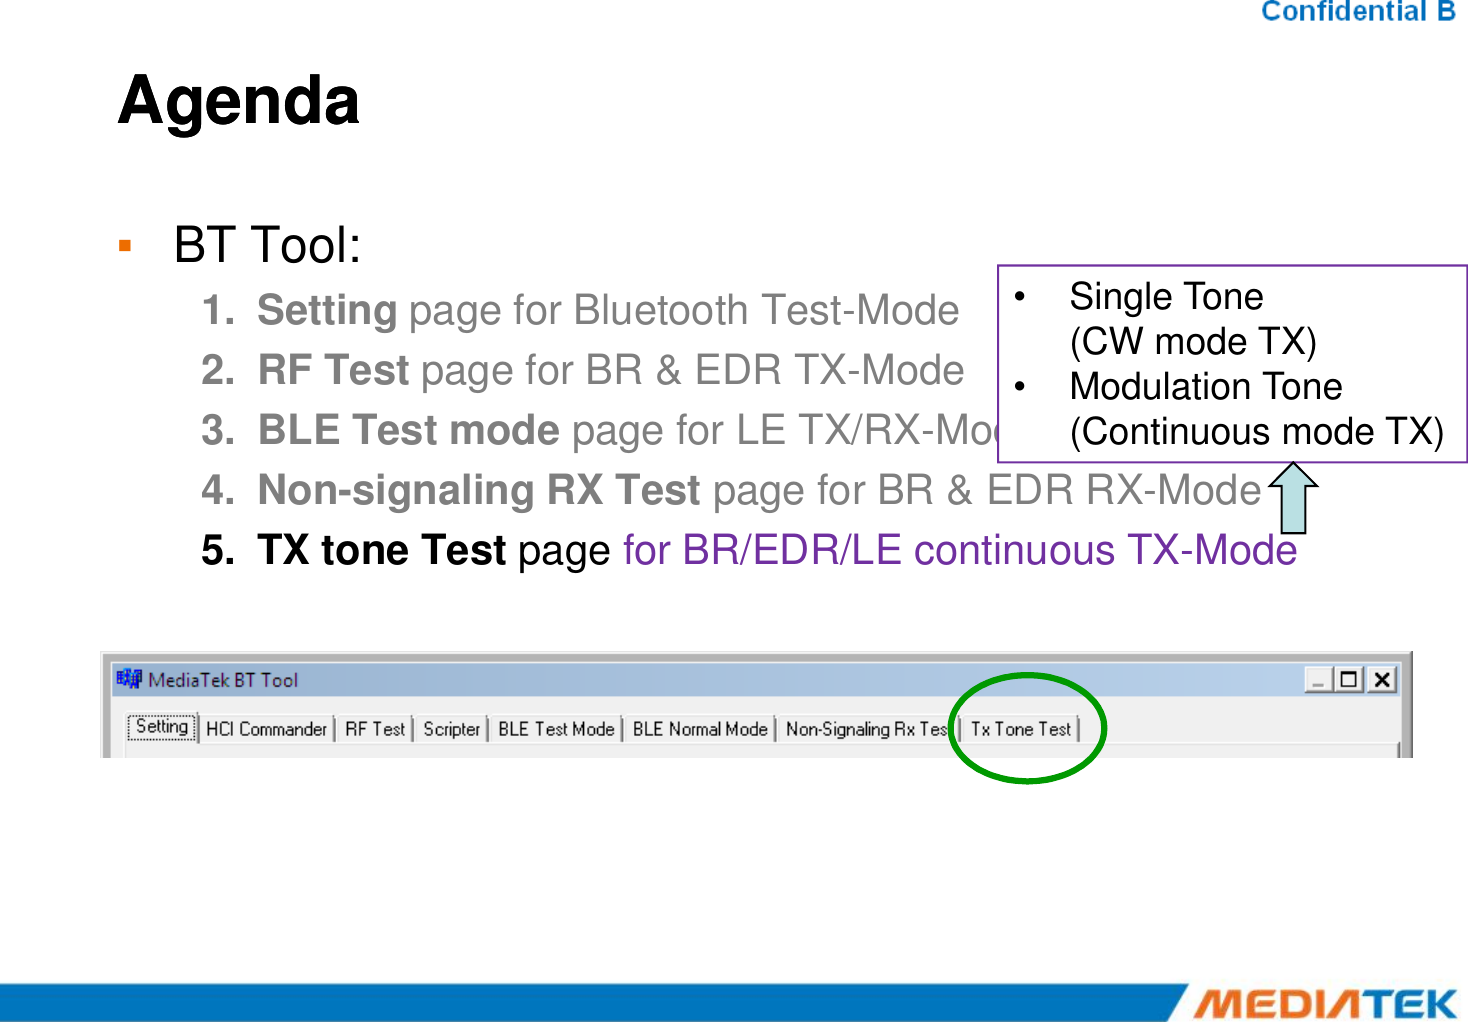 AgendaAgenda▪BT Tool:1.Setting page for Bluetooth Test-Mode 2.RF Test page for BR &amp; EDR TX-Mode 3.BLE Test mode page for LE TX/RX-Mode 4.Non-signaling RX Test page for BR &amp; EDR RX-Mode •Single Tone(CW mode TX)•Modulation Tone (Continuous mode TX)5.TX tone Test page for BR/EDR/LE continuous TX-Mode 